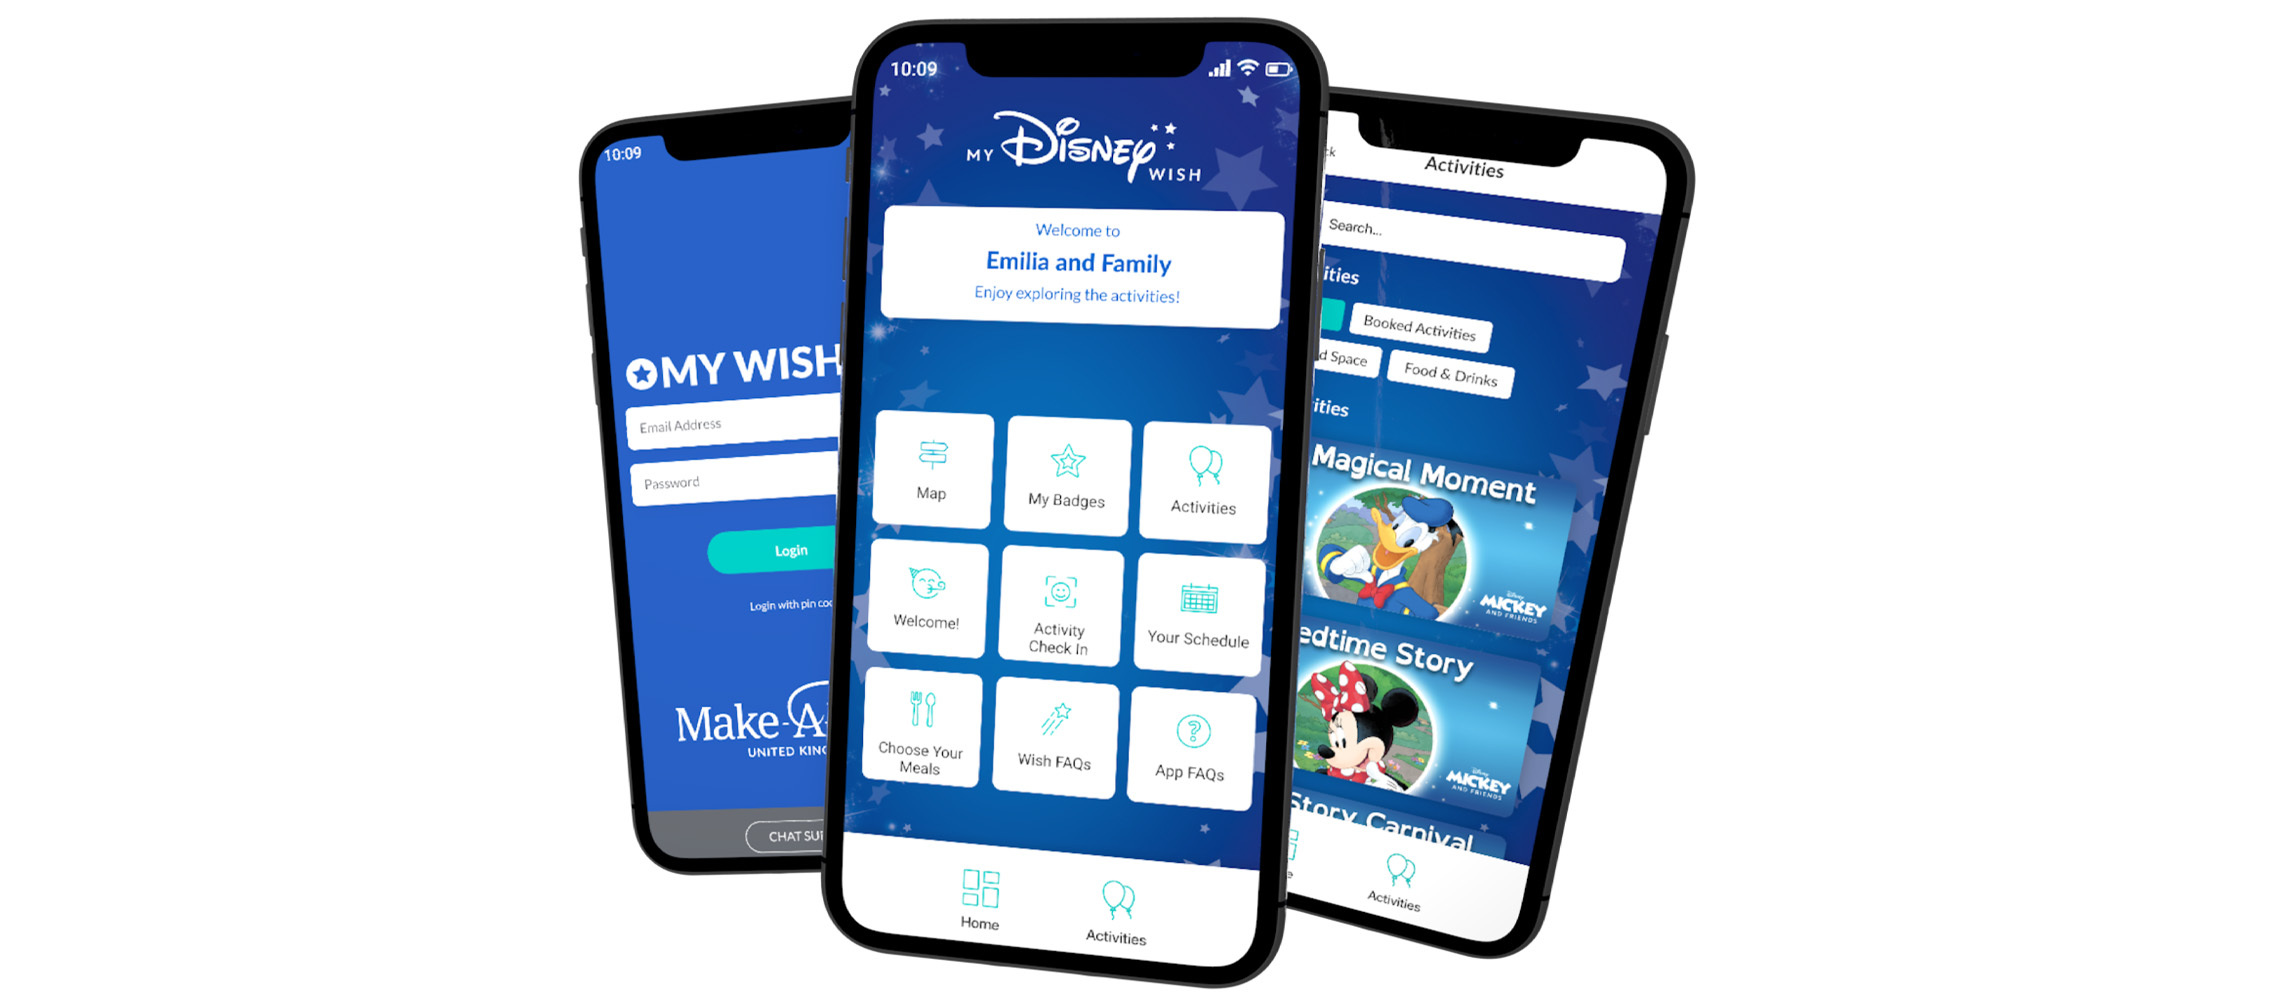 An image showing the welcome screen of the Make a Wish event app